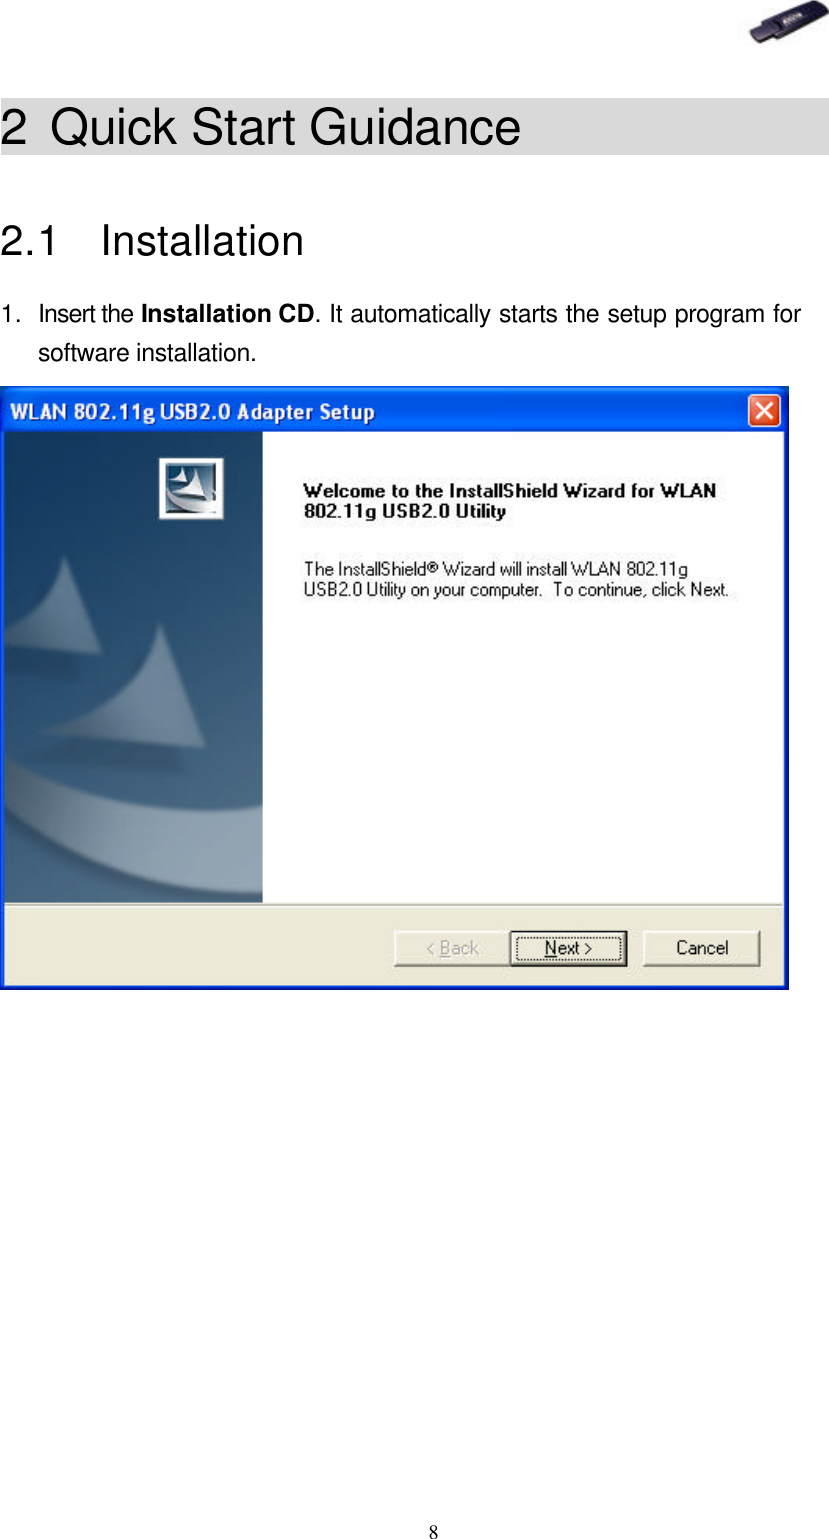   82 Quick Start Guidance               2.1 Installation 1. Insert the Installation CD. It automatically starts the setup program for   software installation.  